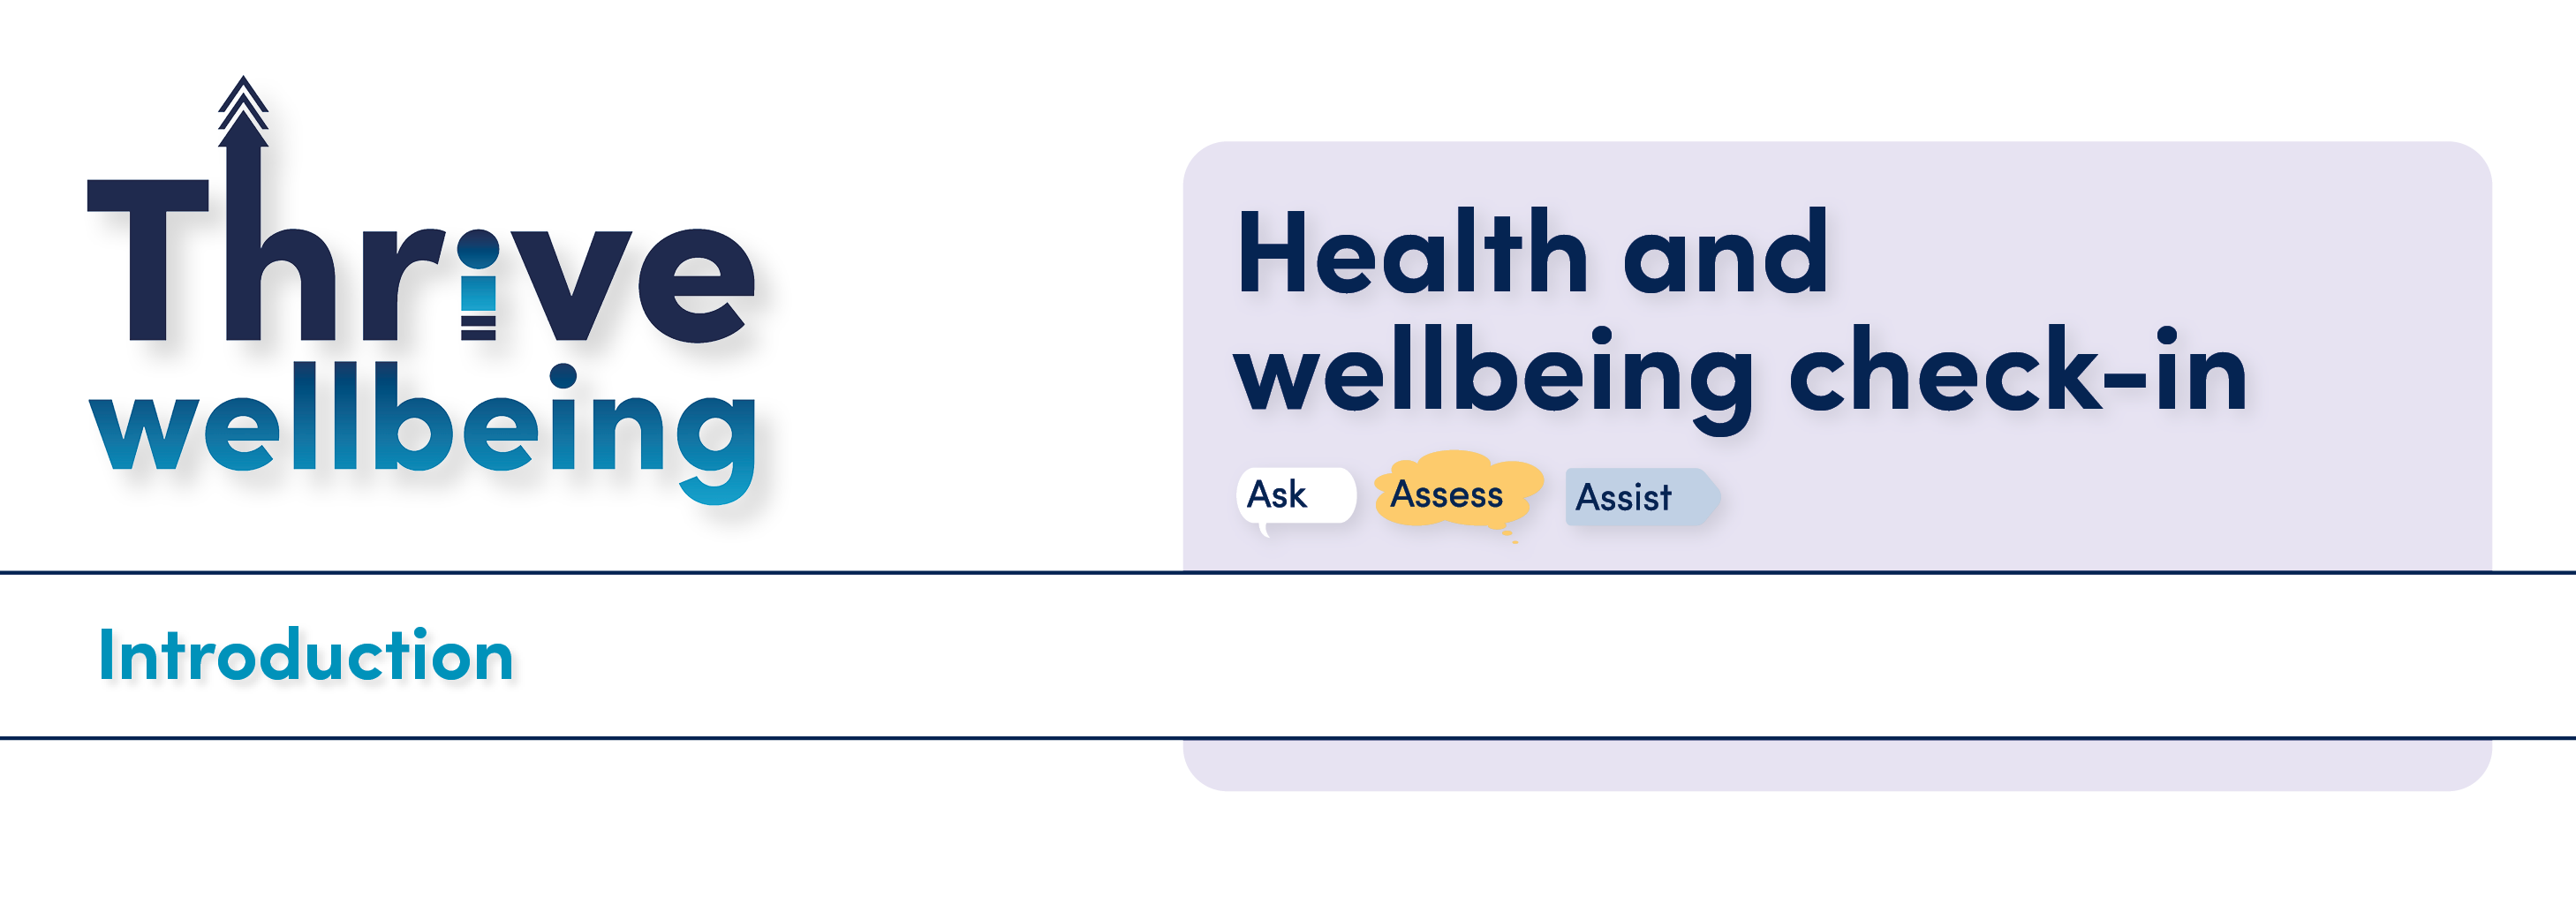 wellbeing check in page headings3